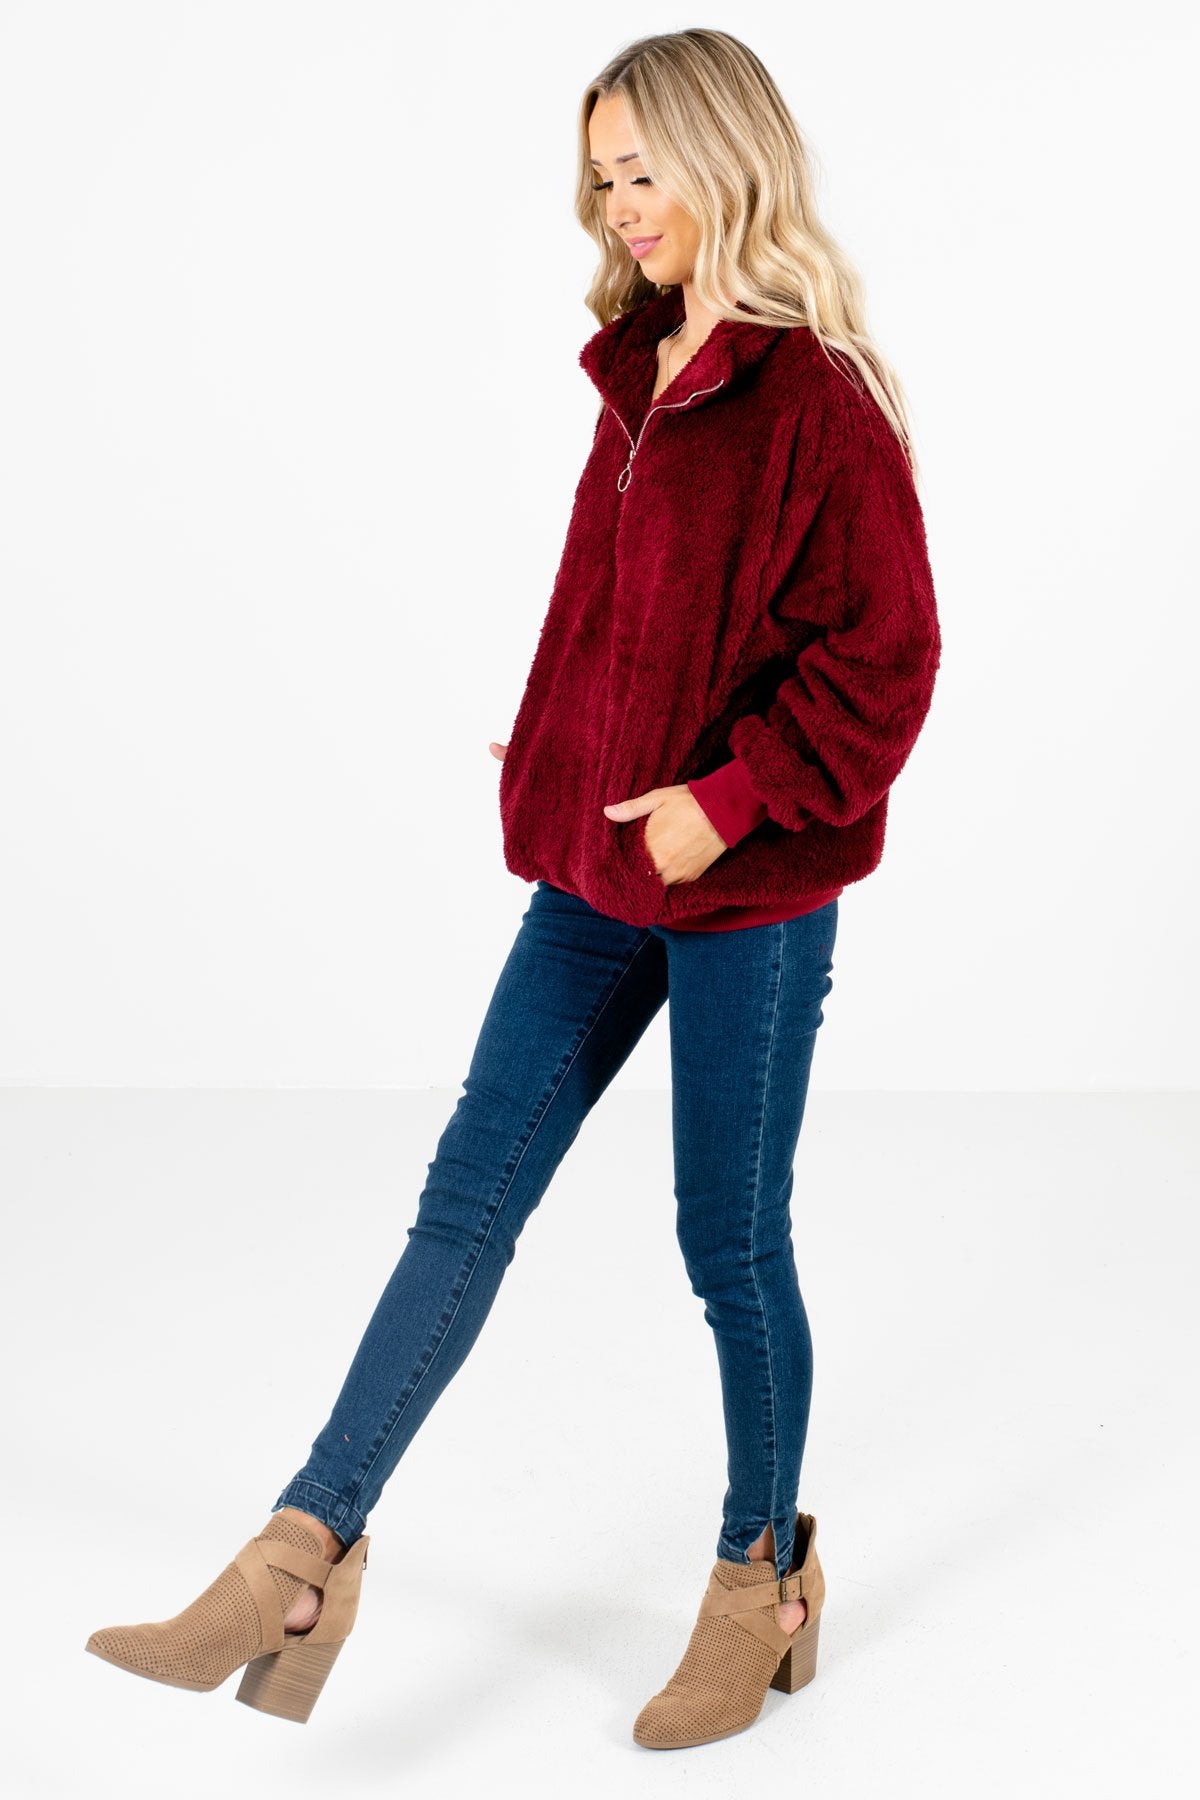 Burgundy Cute and Comfortable Boutique Pullovers for Women